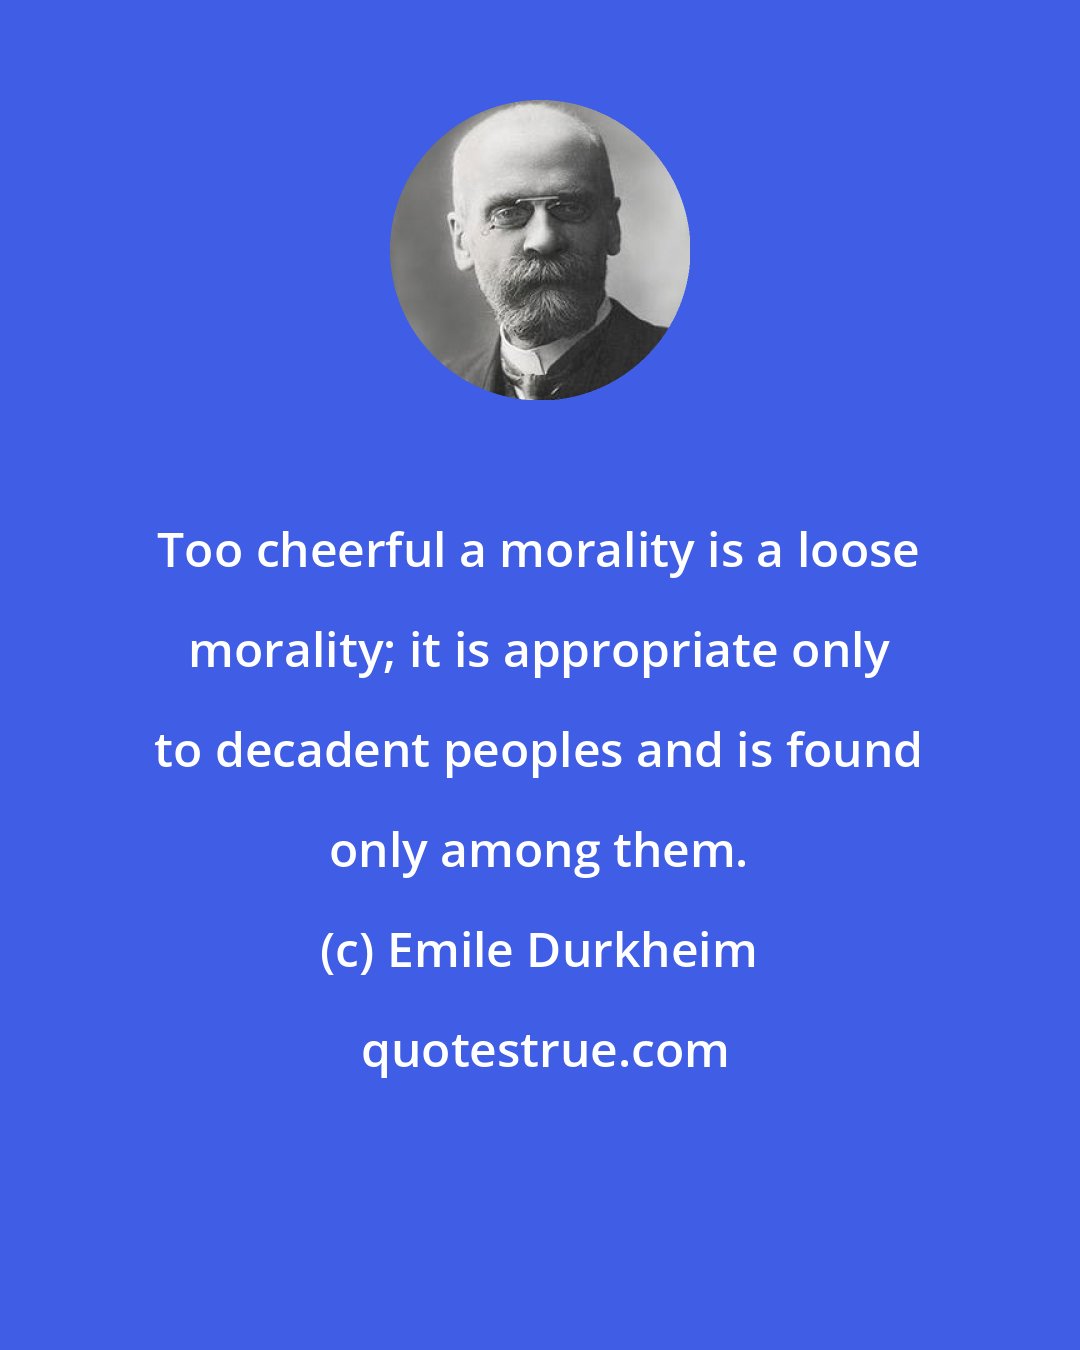 Emile Durkheim: Too cheerful a morality is a loose morality; it is appropriate only to decadent peoples and is found only among them.